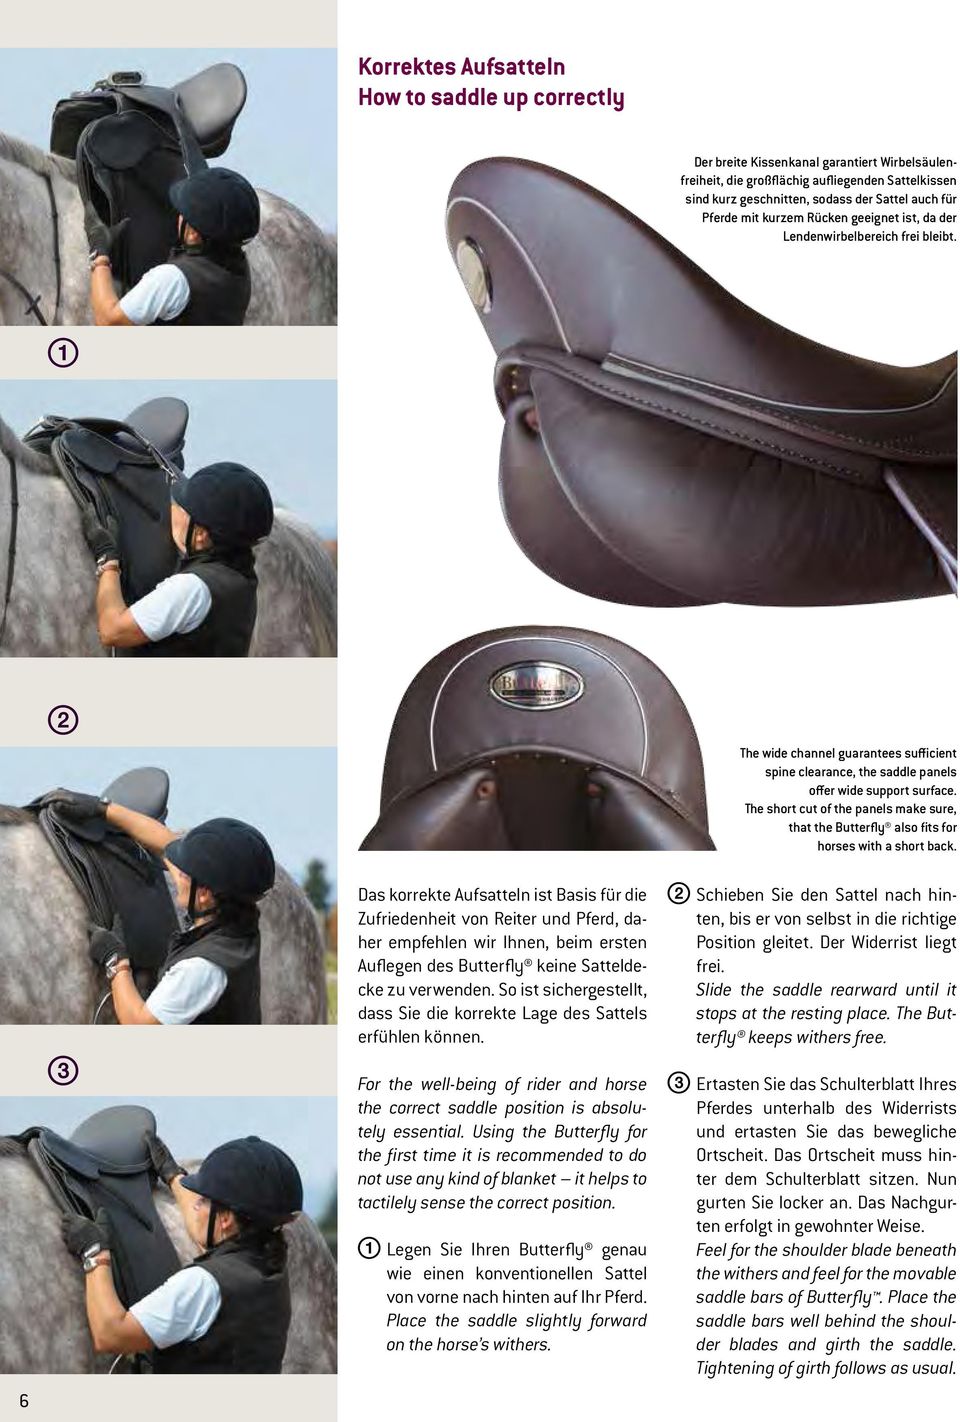 The short cut of the panels make sure, that the Butterfly also fits for horses with a short back.